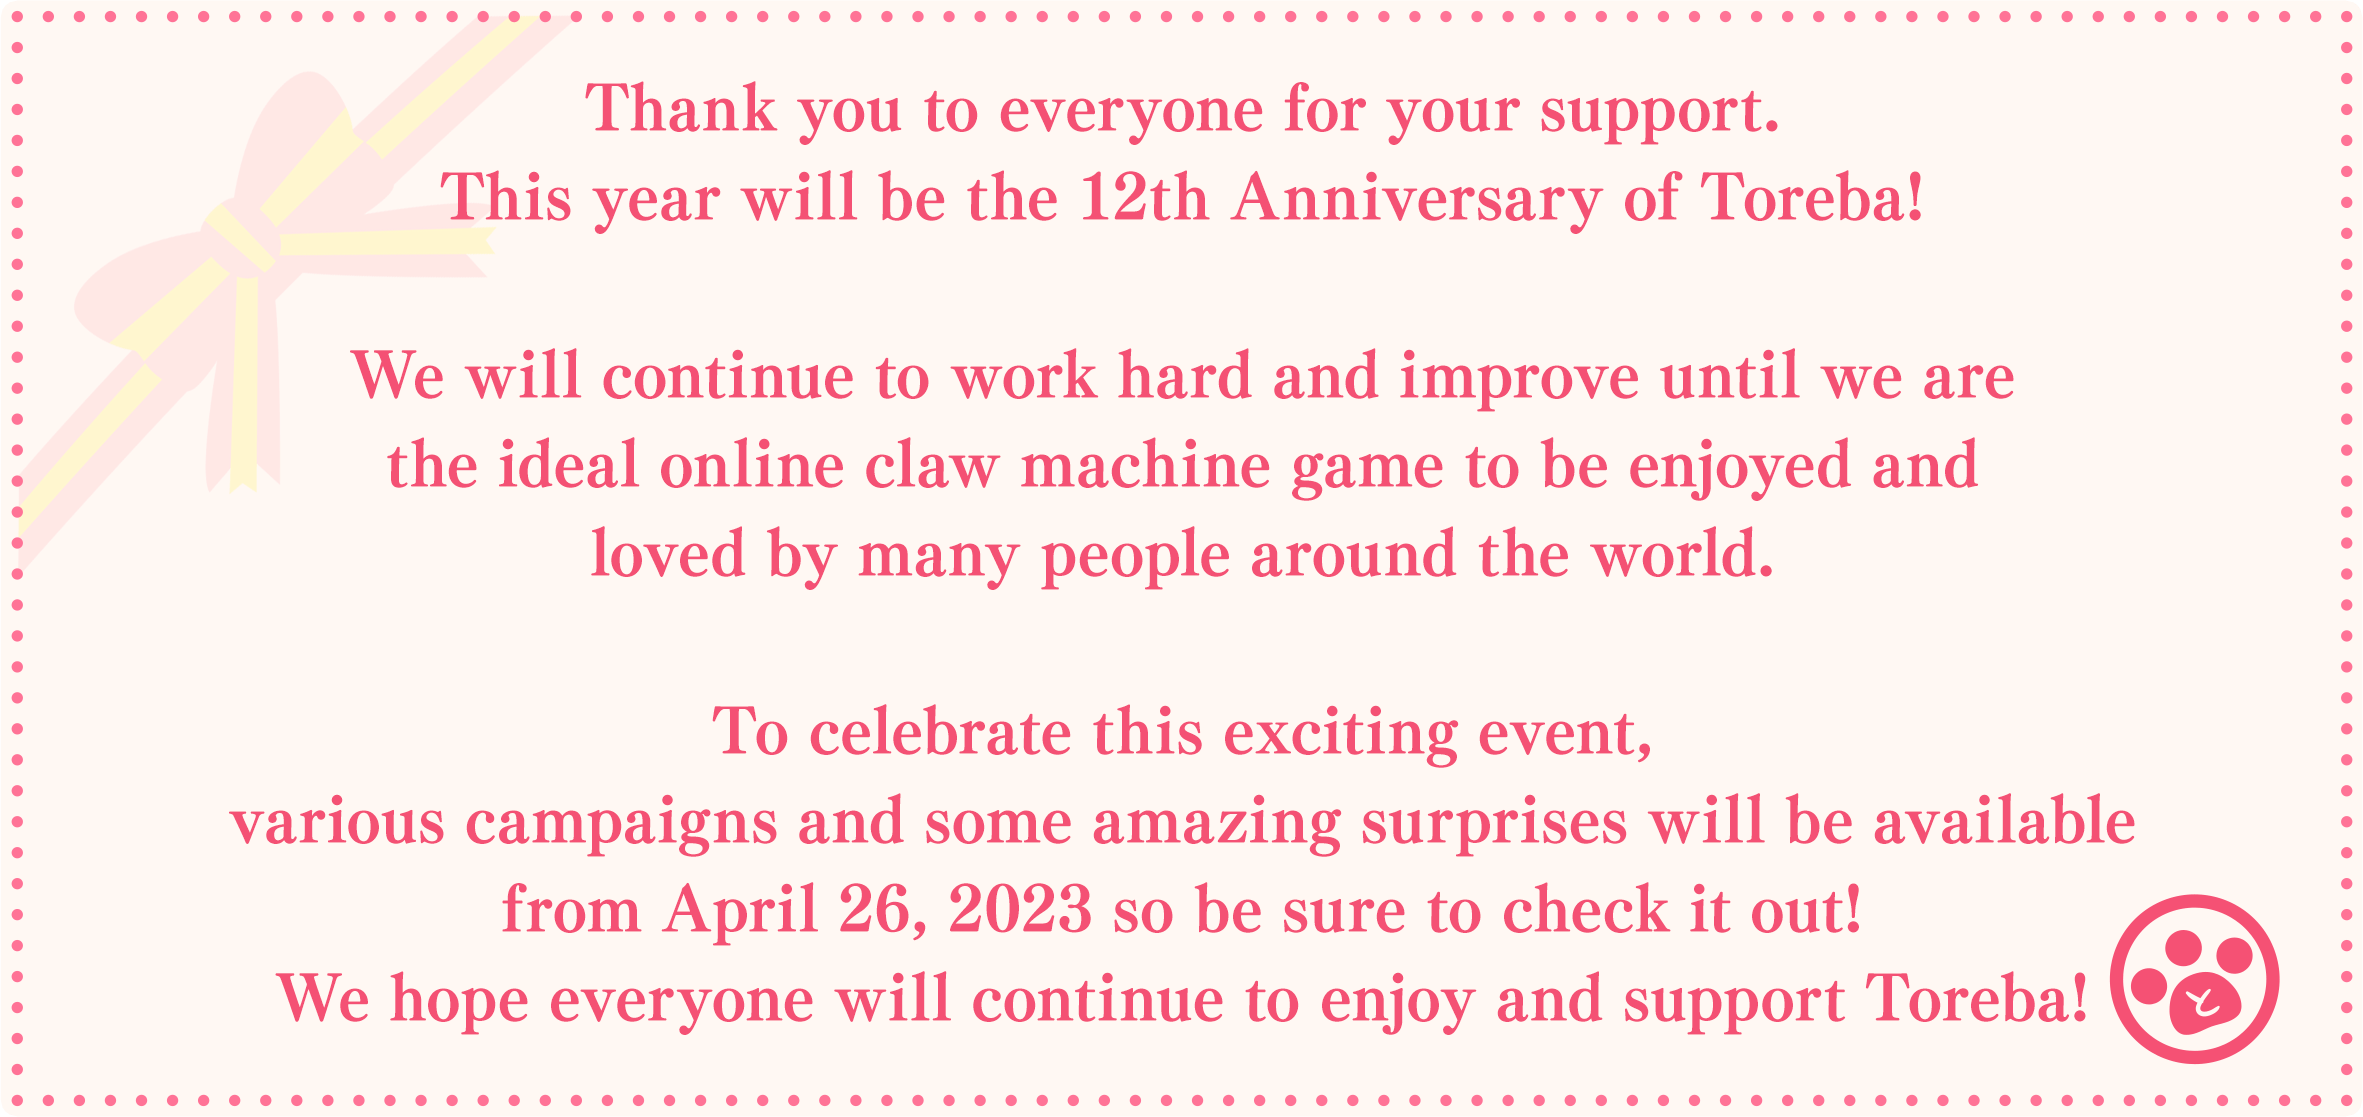 Thank you to everyone for your support.This year will be the 12th Anniversary of Toreba!We will continue to work hard and improve until we are the ideal online claw machine game to be enjoyed and loved by many people around the world.To celebrate this exciting event, various campaigns and some amazing surprises will be available from April 26, 2023 so be sure to check it out!We hope everyone will continue to enjoy and support Toreba!